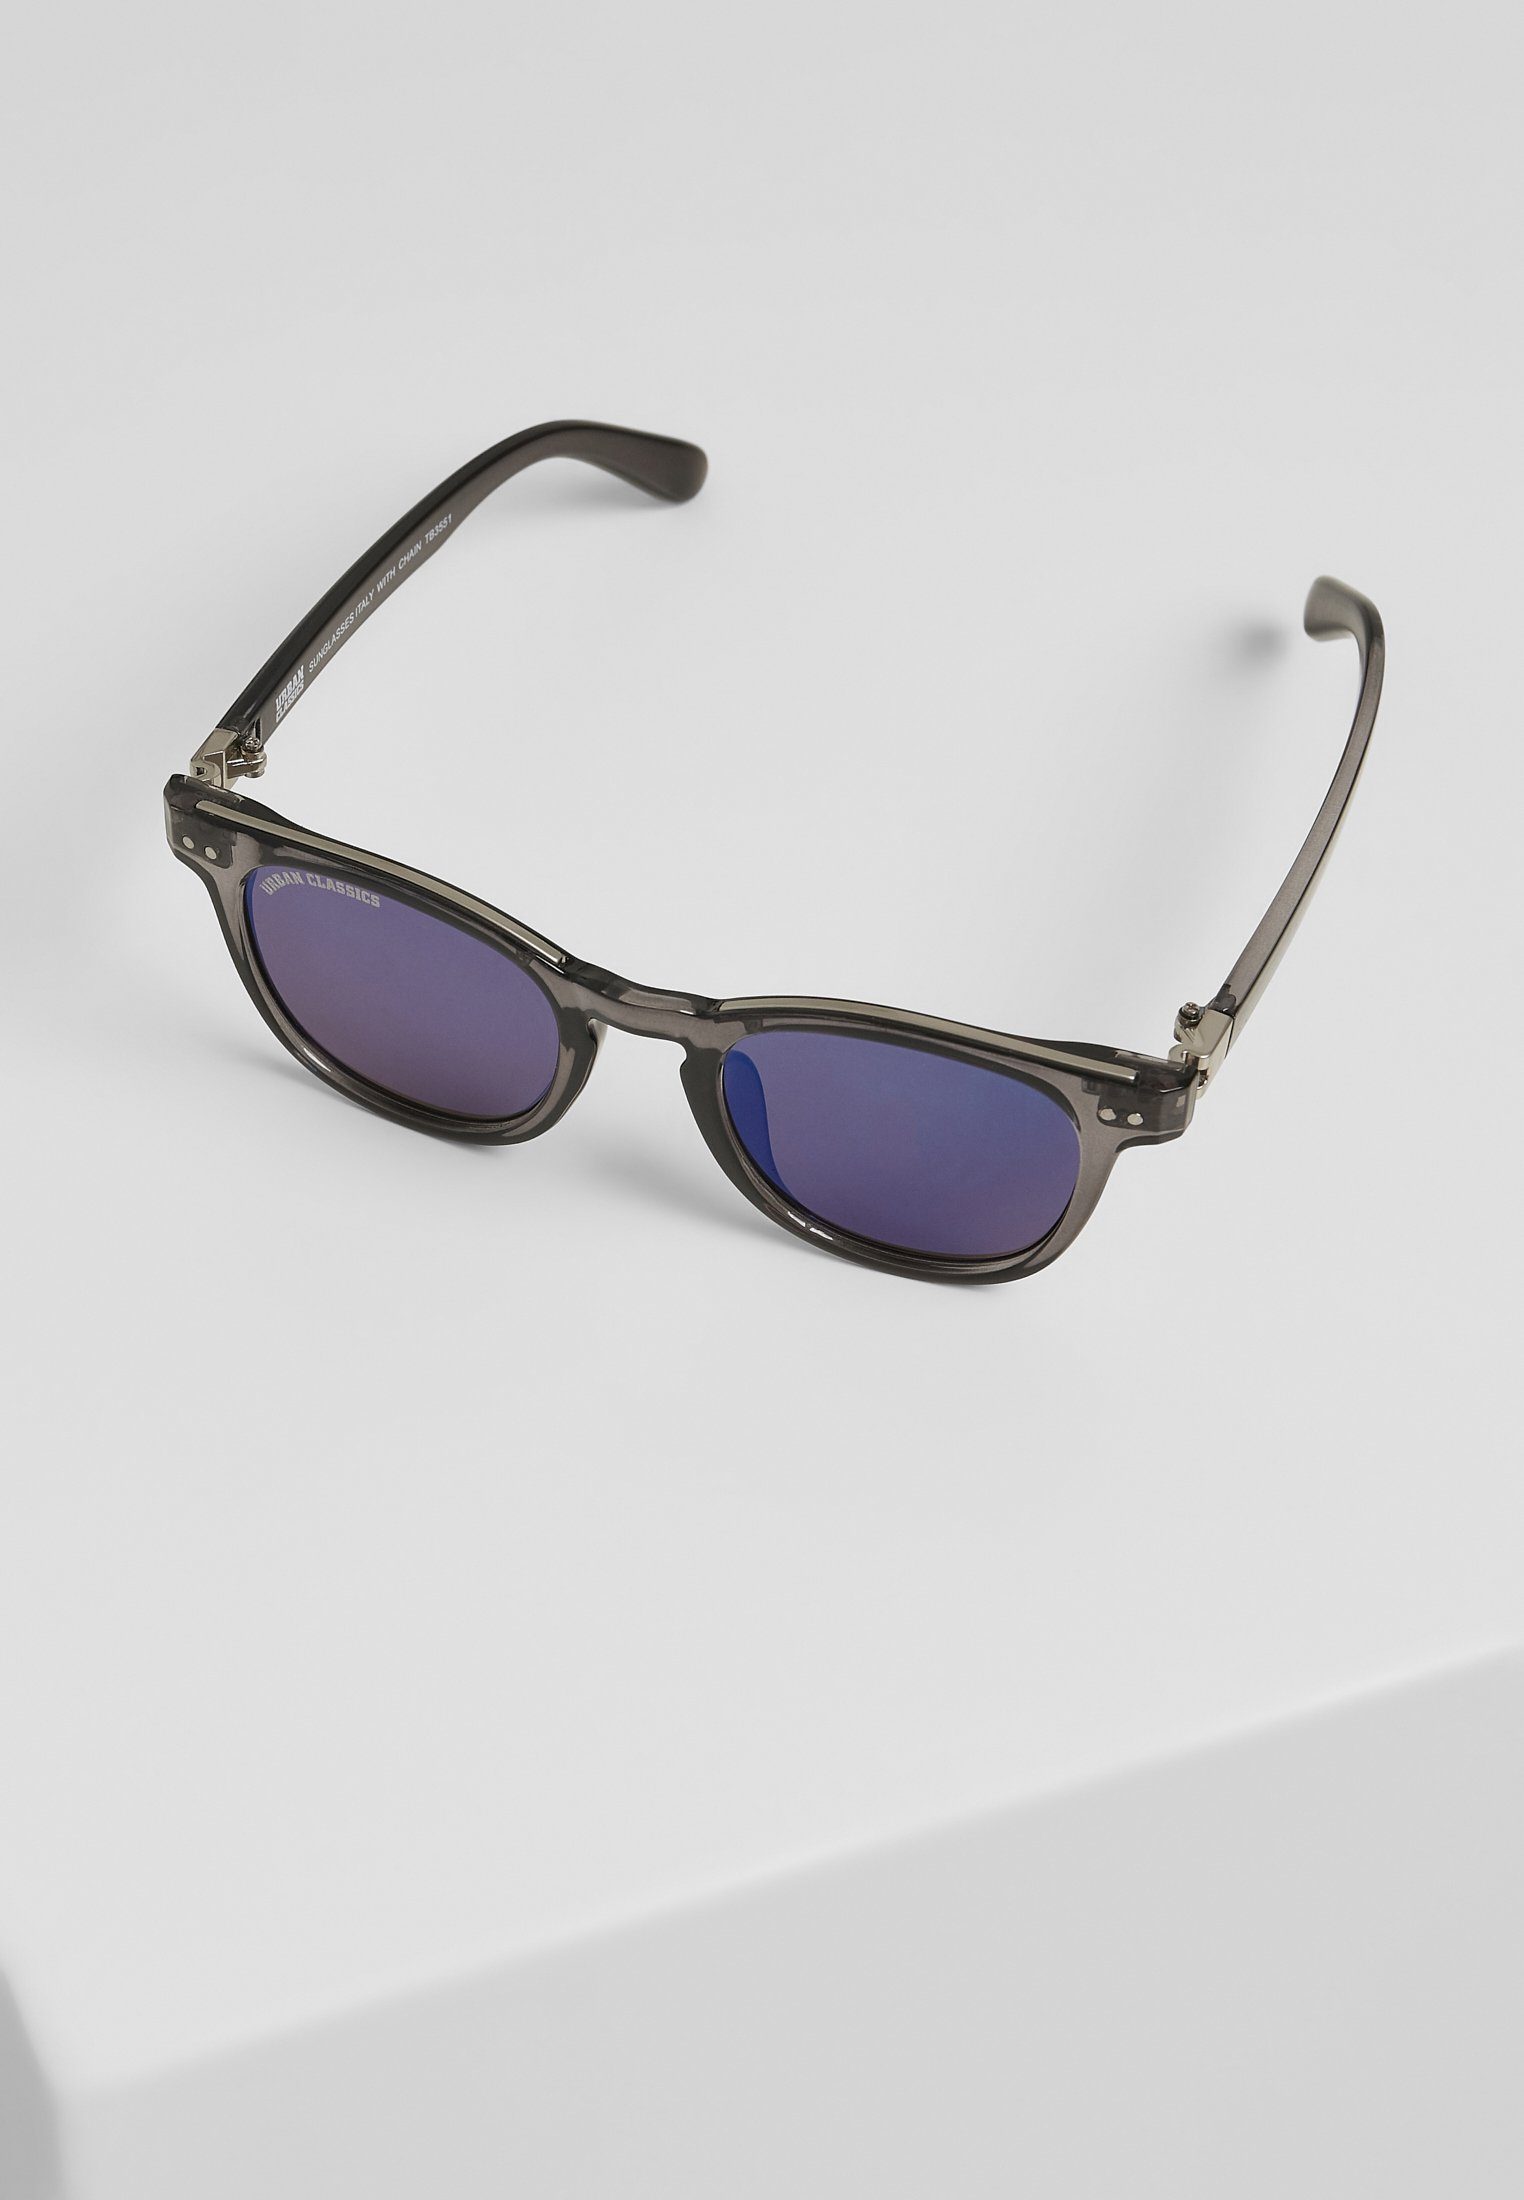 URBAN Sonnenbrille with chain Sunglasses Italy CLASSICS Unisex